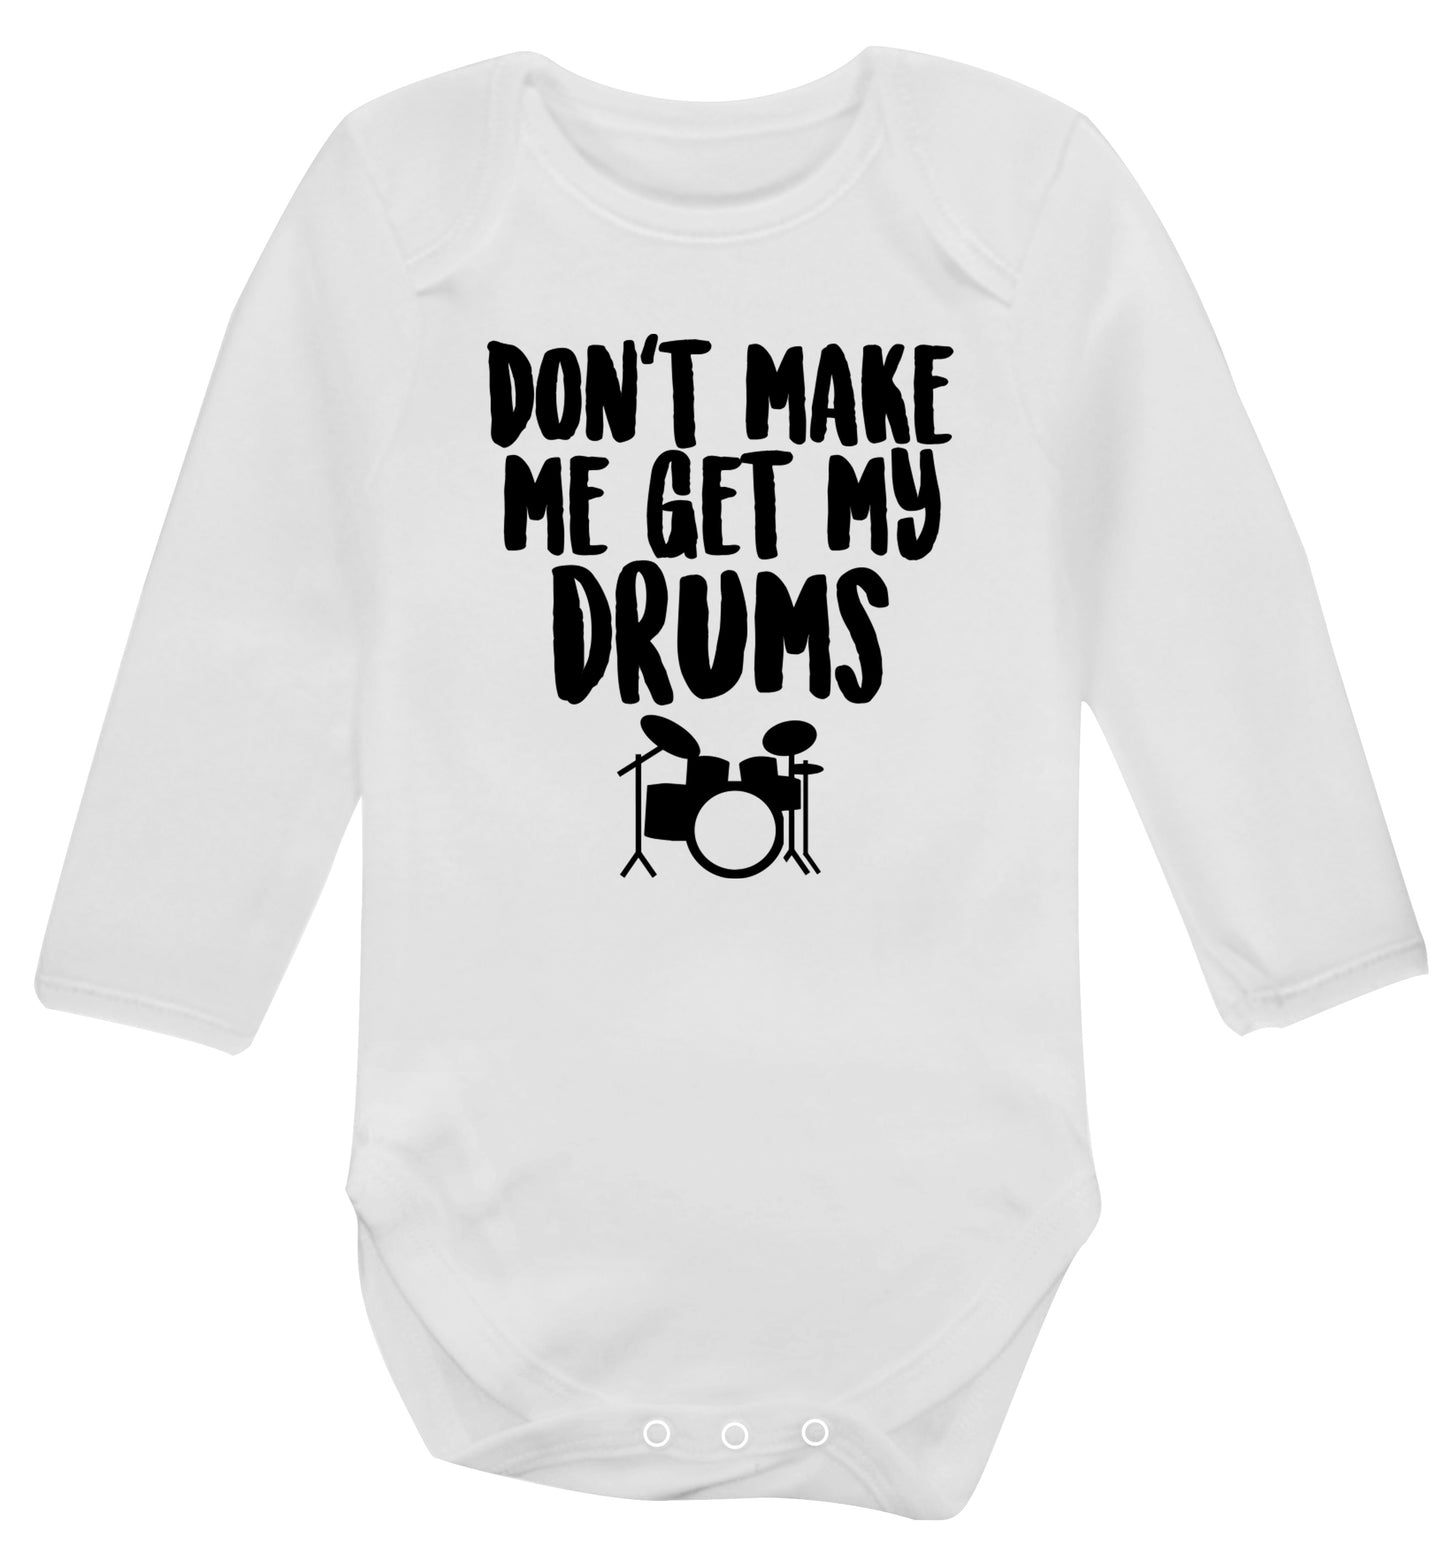 Don't make me get my drums Baby Vest long sleeved white 6-12 months